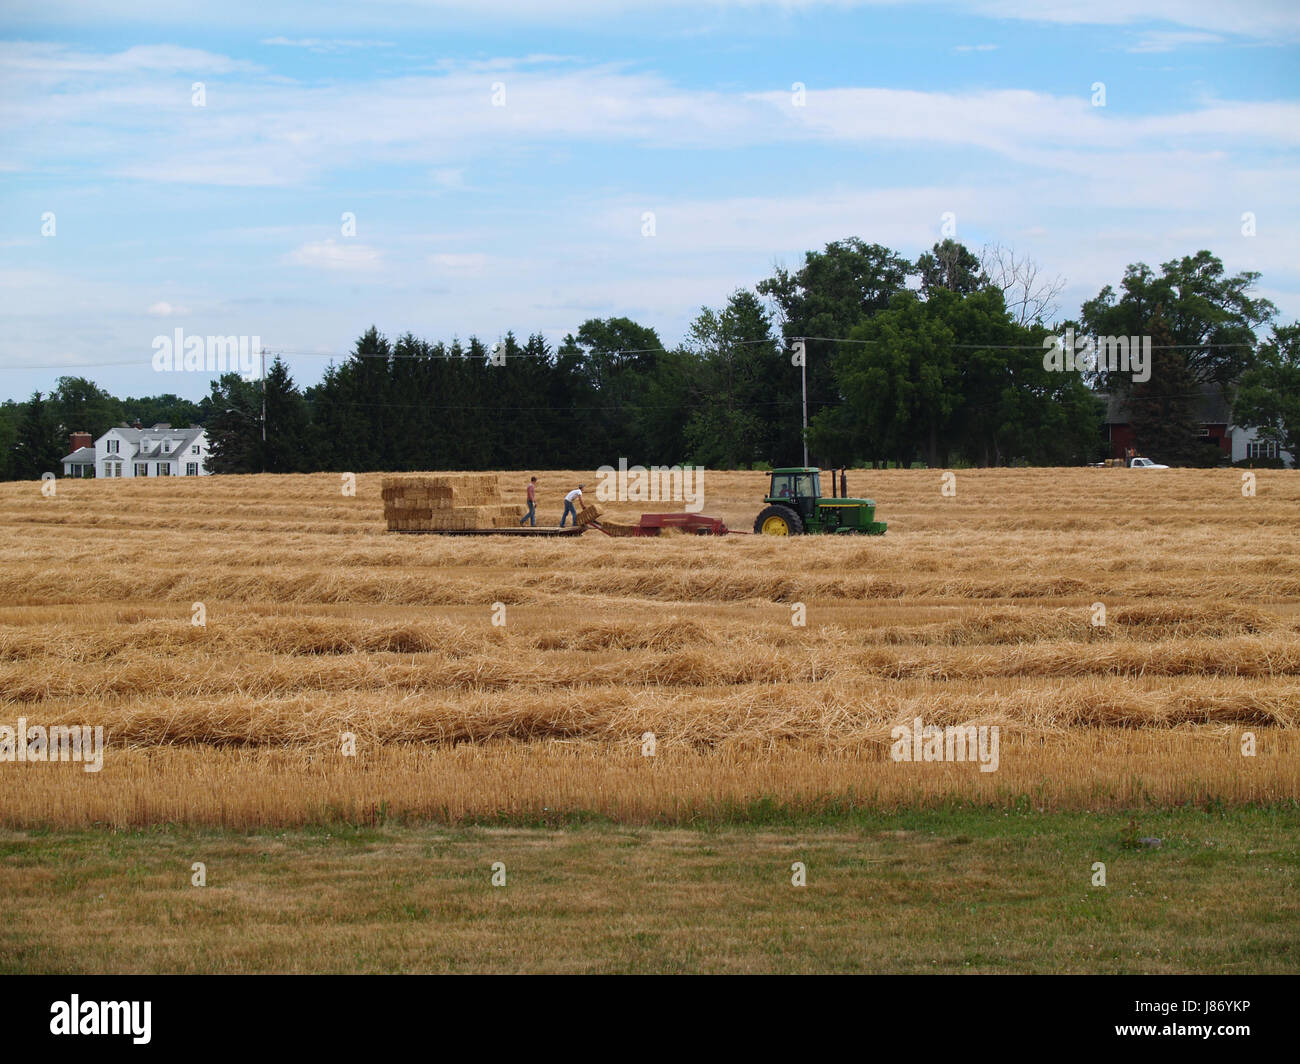 agriculture, farming, field, wheat, farm, straw, house, building, agricultural, Stock Photo